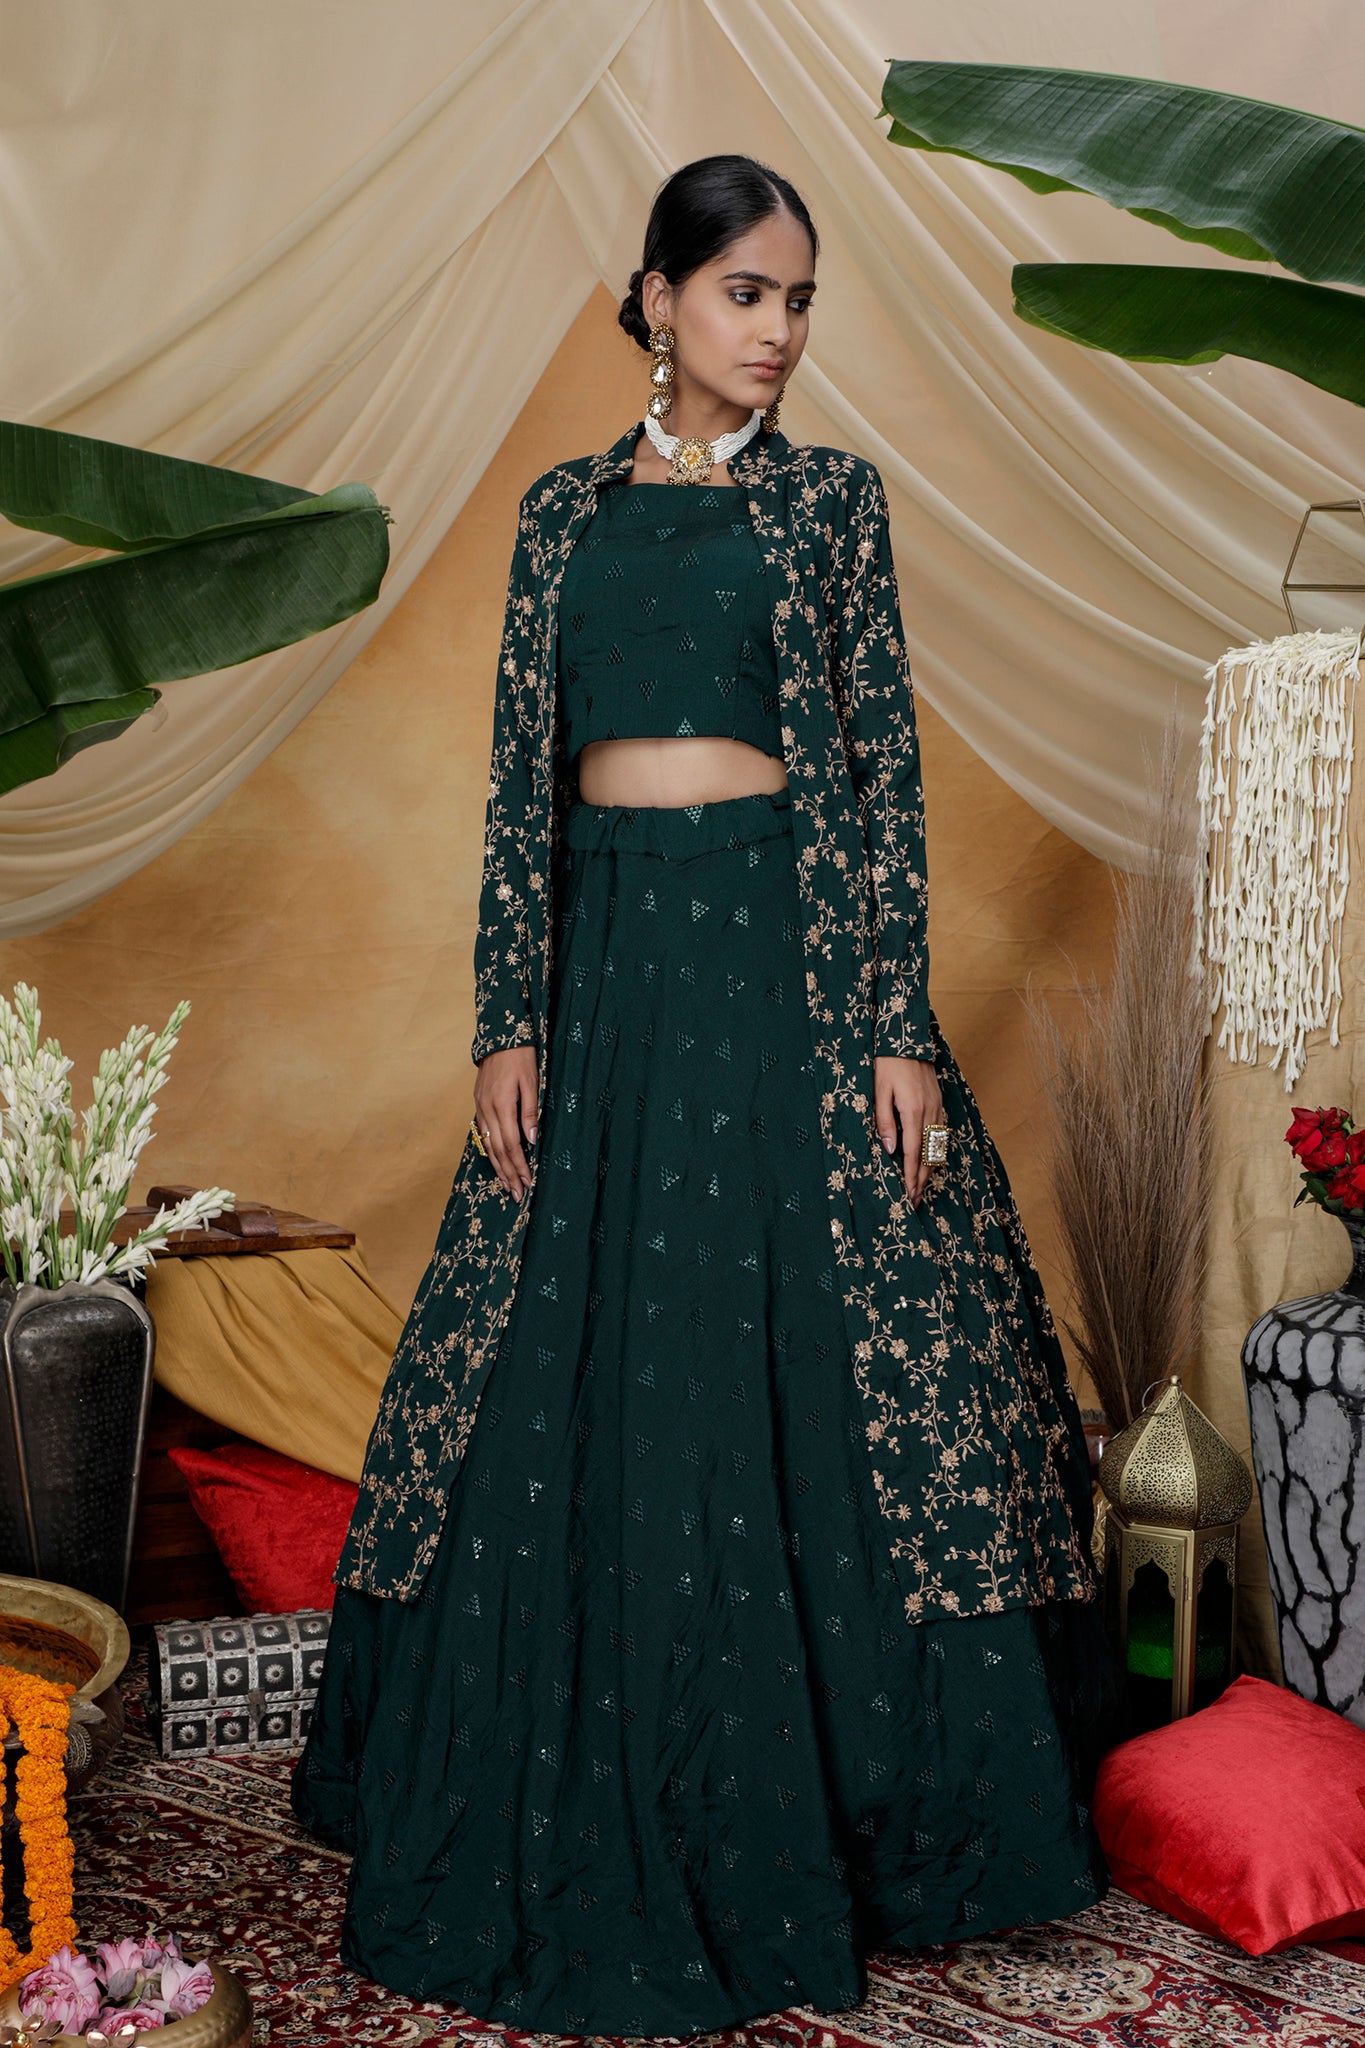 Source New Beautiful-Stylish-Koti with Lehenga for Party-wear-dress with  beautiful applique work for Party/ Wedding =2021 on m.alibaba.com